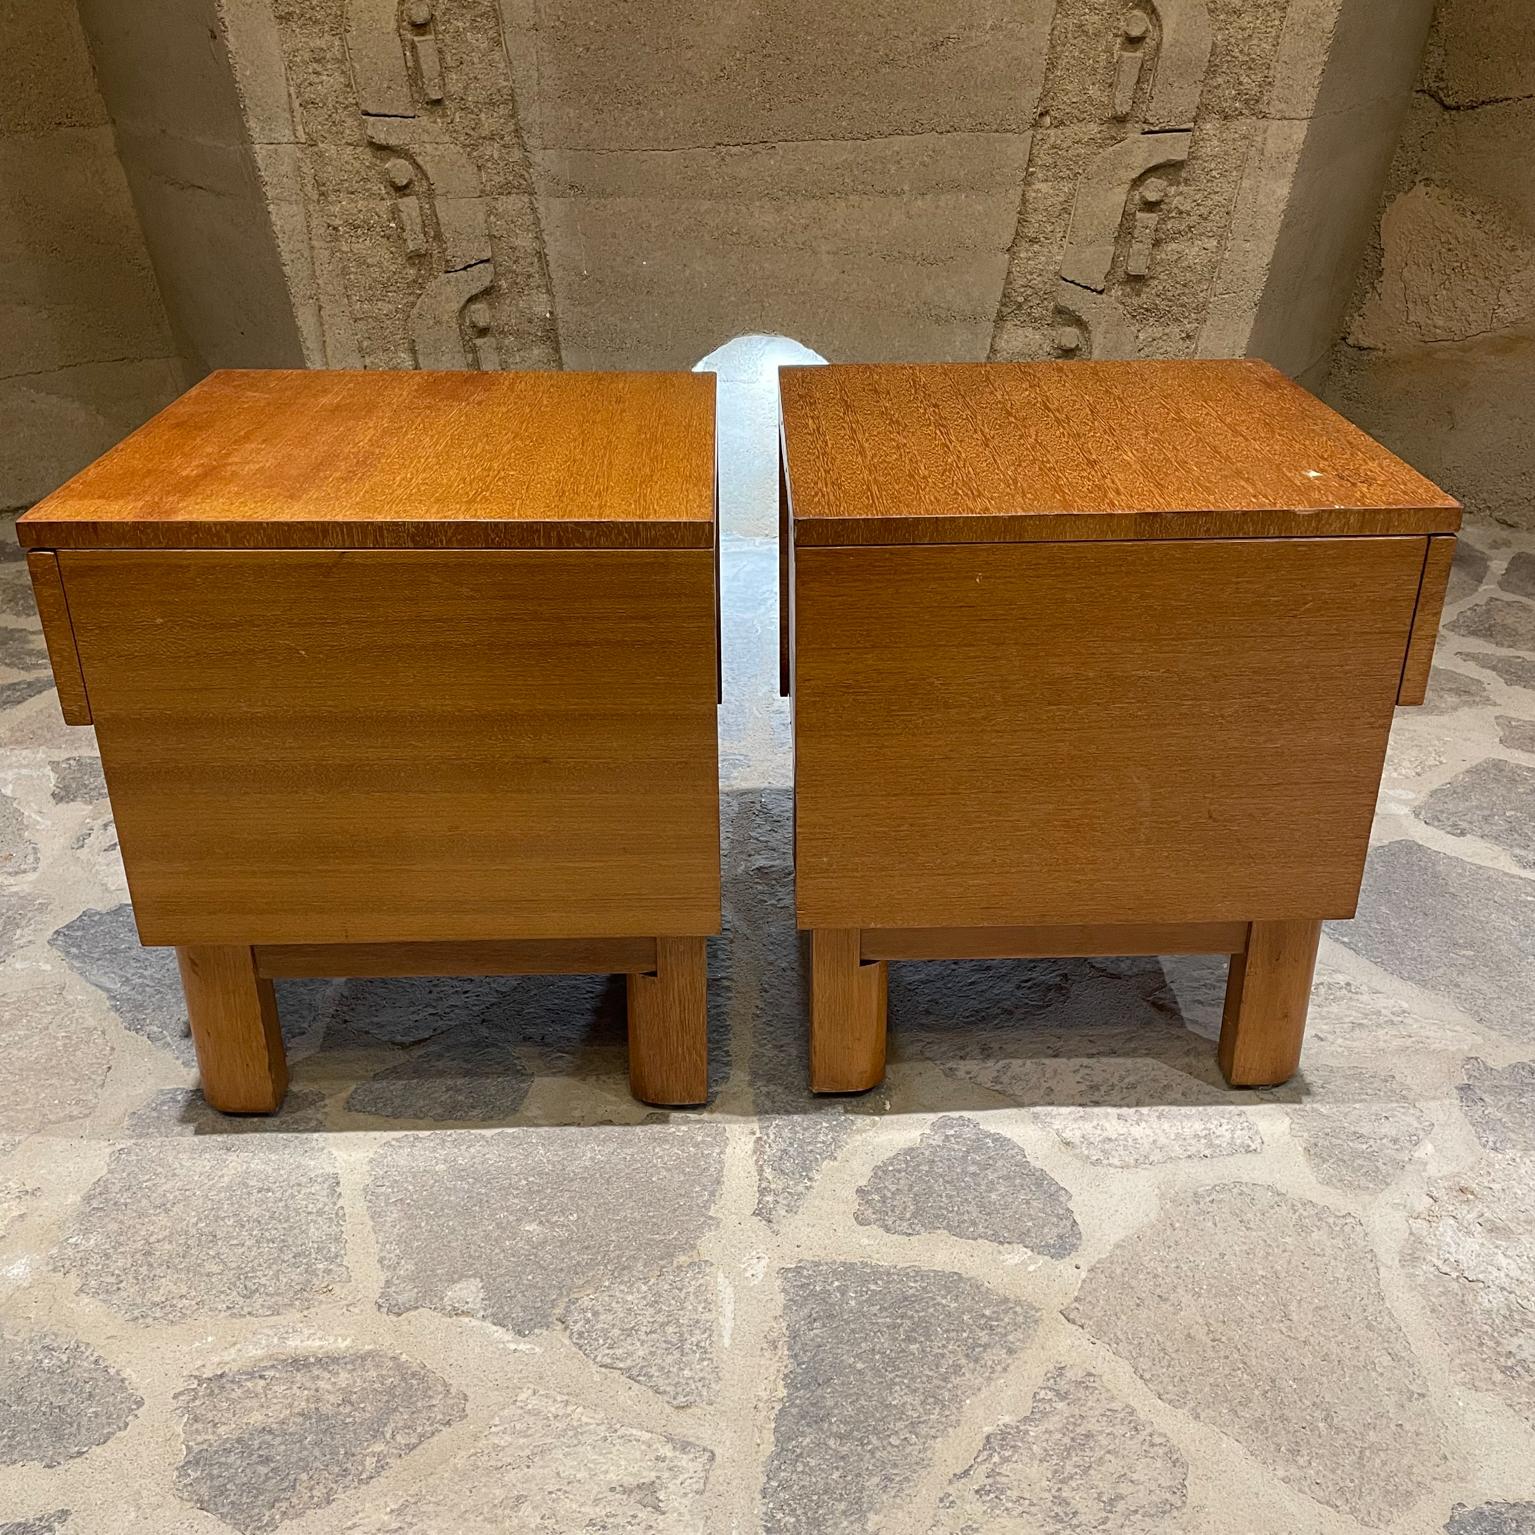  1950s John Keal for Brown Saltman Clean Nightstands Blonde Mahogany & Brass In Good Condition For Sale In Chula Vista, CA